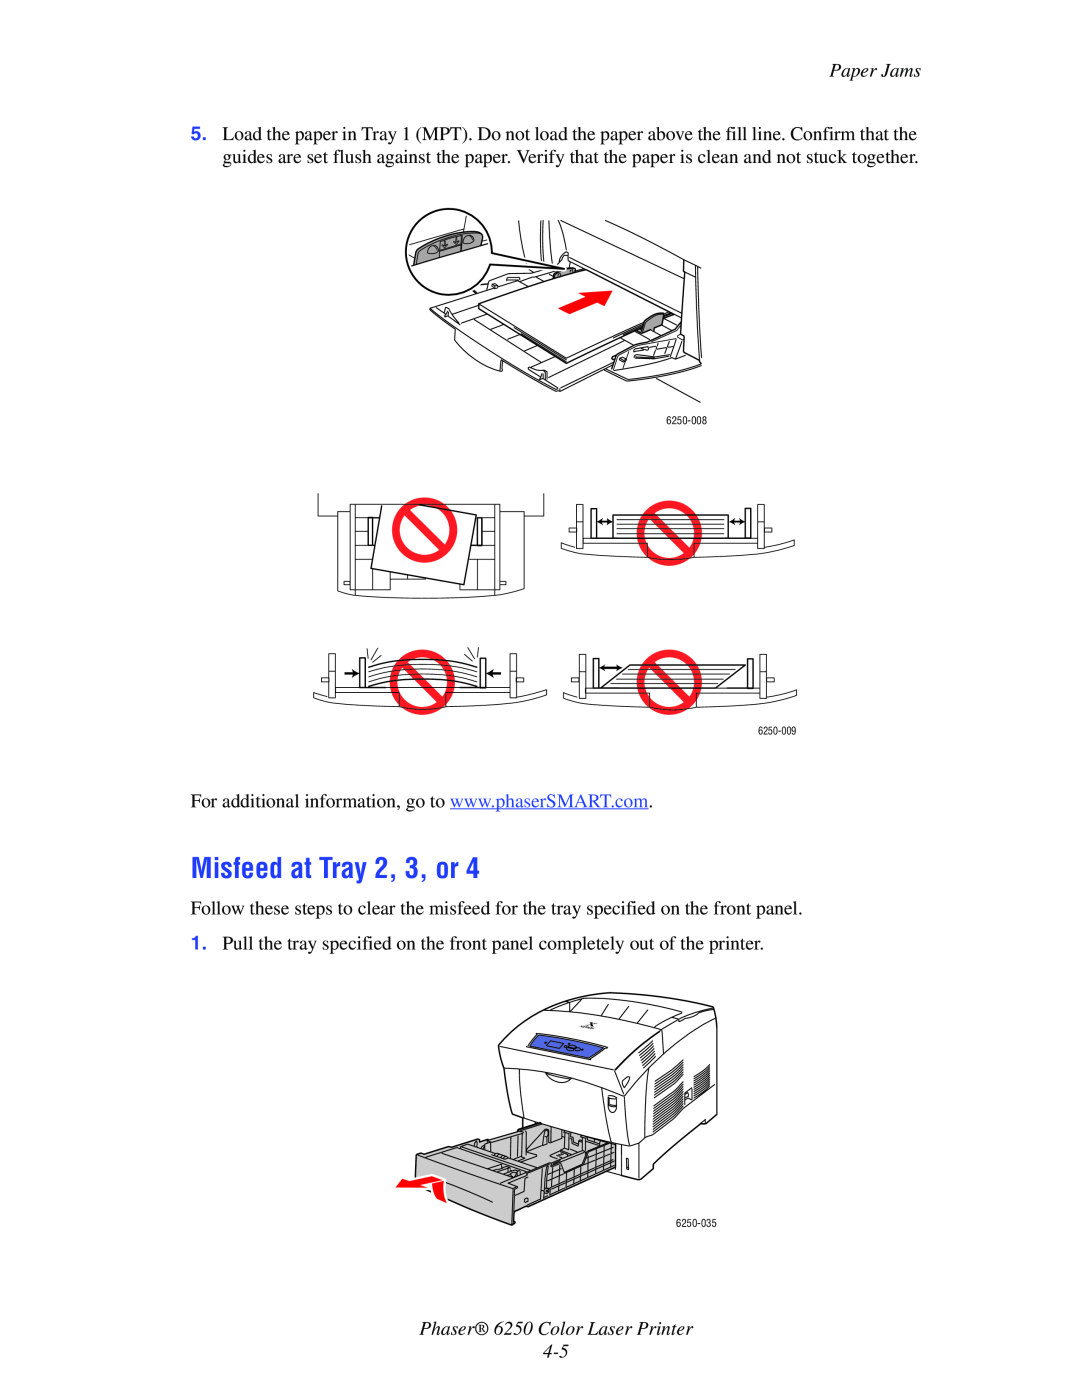 Xerox manual Misfeed at Tray 2, 3, or, Phaser 6250 Color Laser Printer 4-5, Paper Jams 